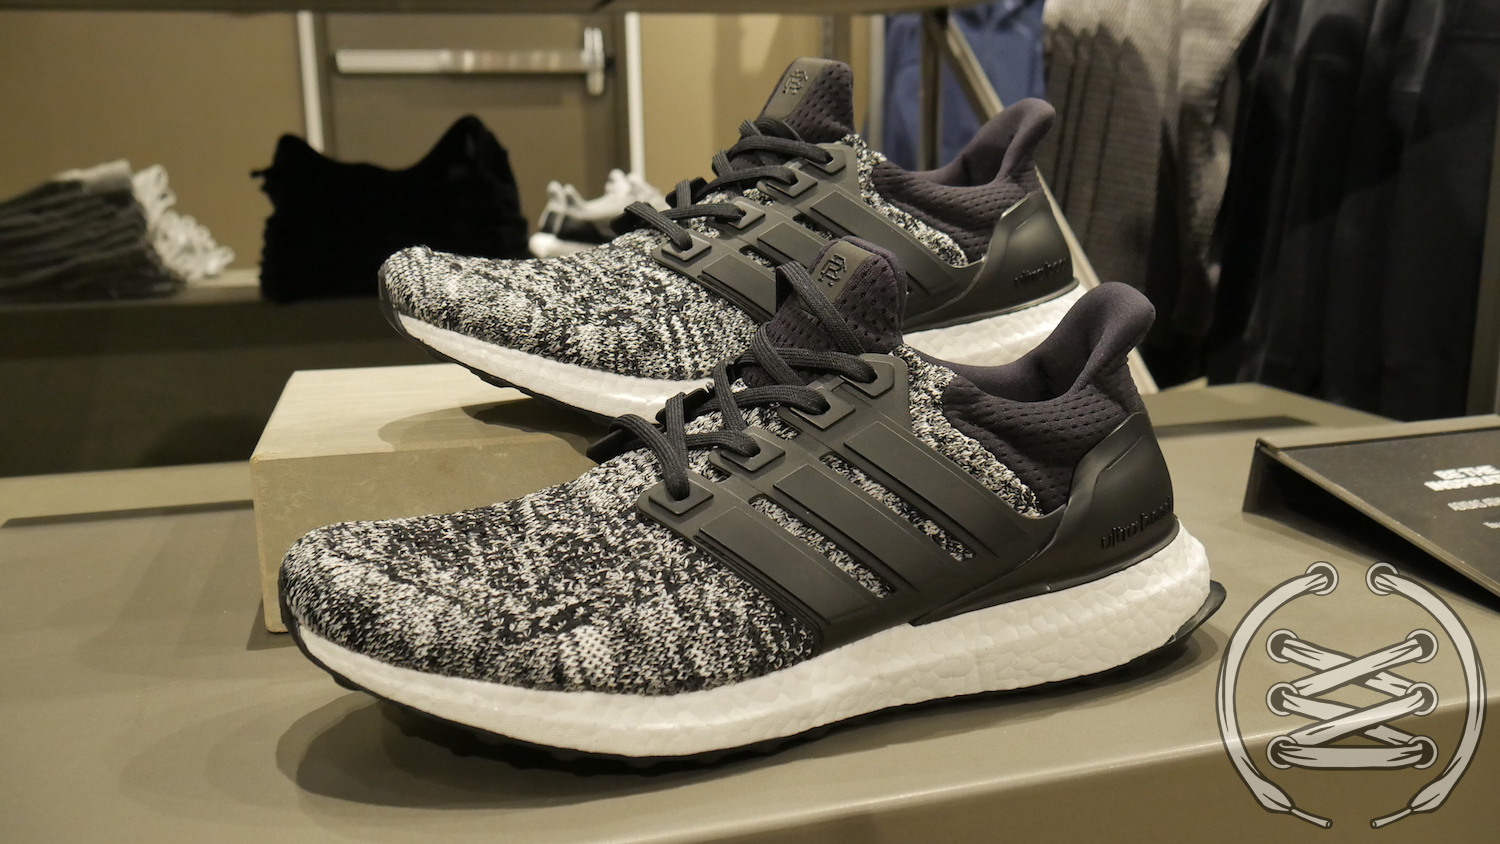 adidas nyc reigning champ ultraboost